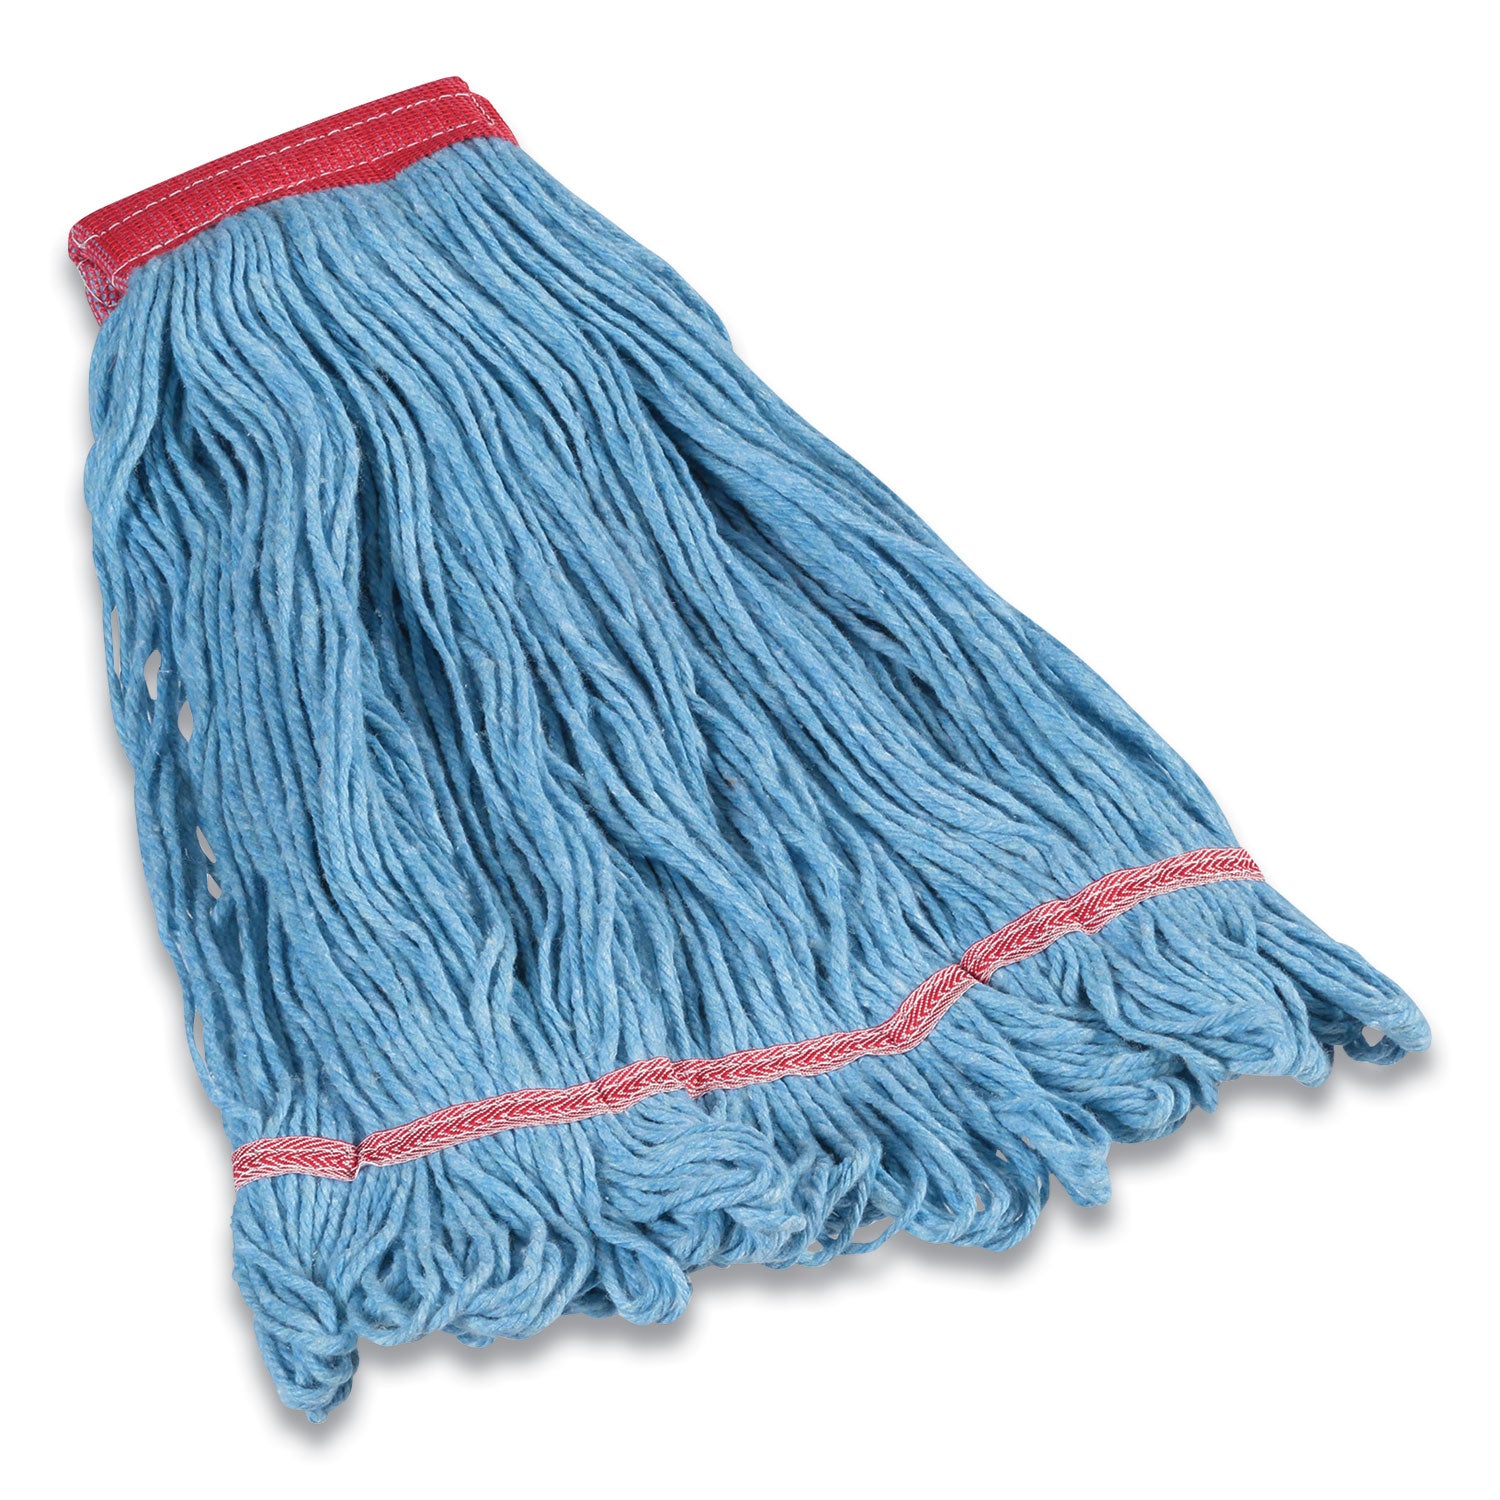 looped-end-wet-mop-head-cotton-rayon-polyester-blend-large-5-headband-blue_cwz24420787 - 1